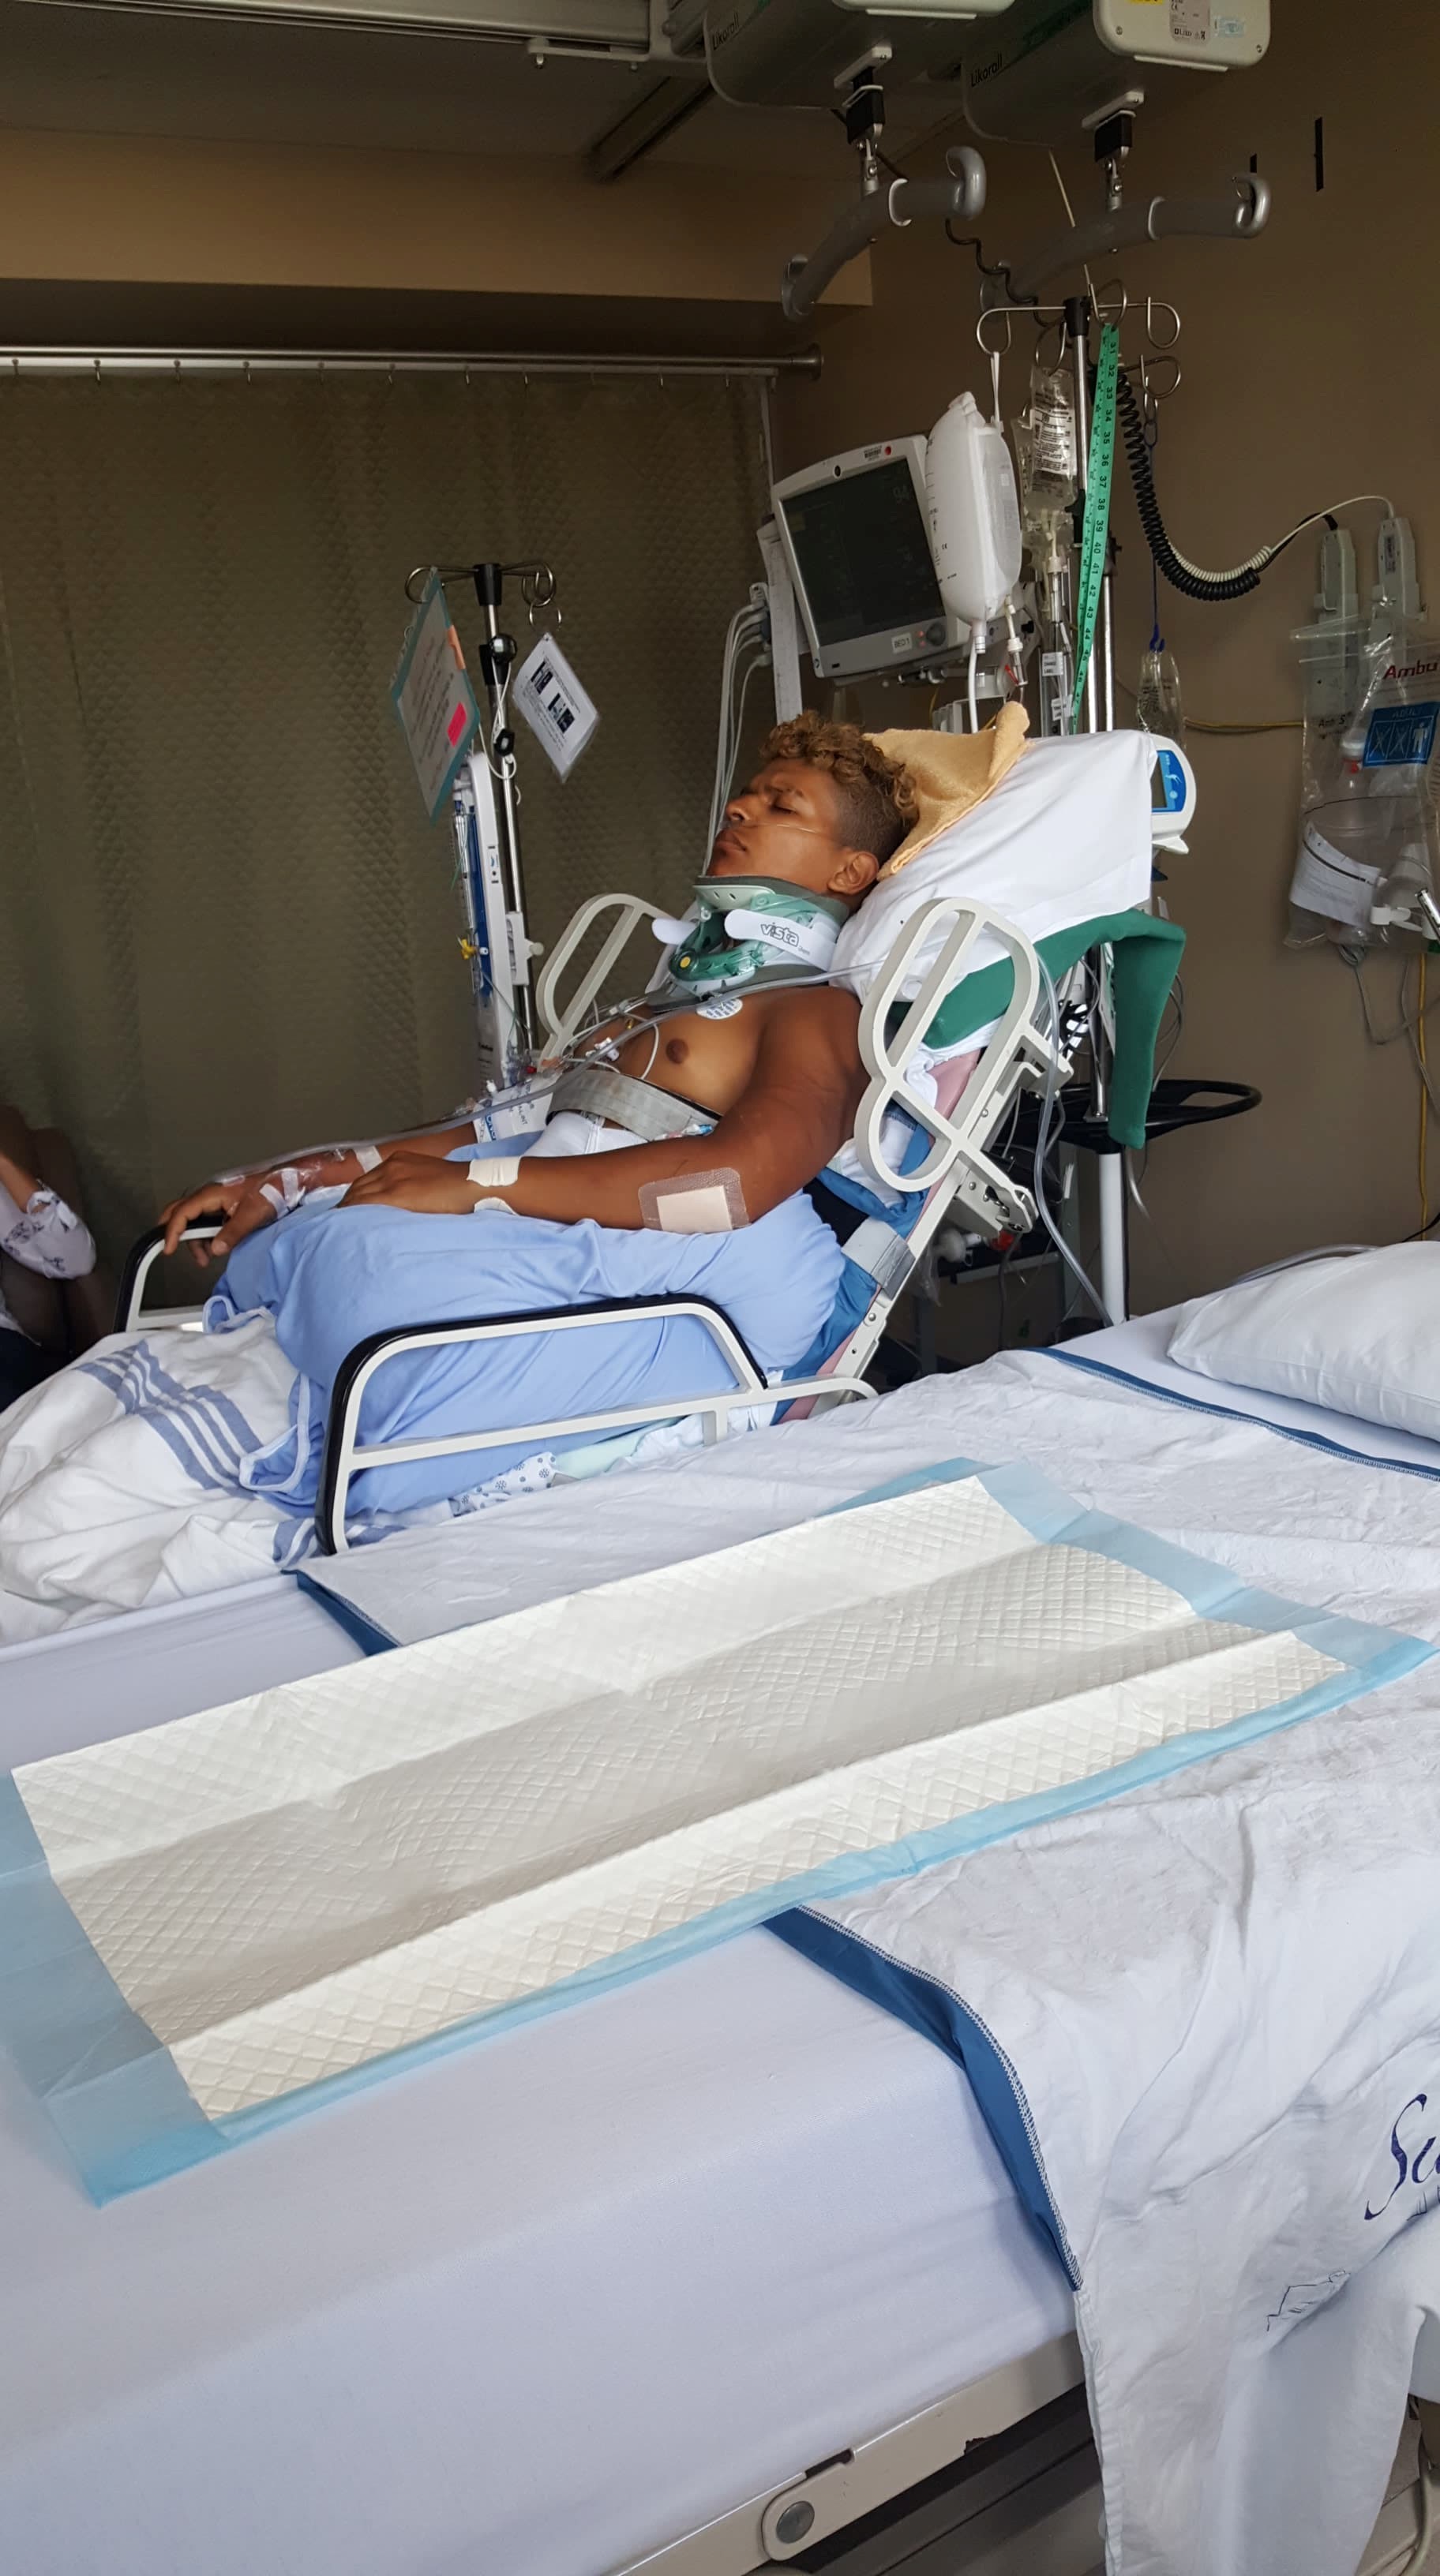 Paulo in laying hospital bed after his accident.